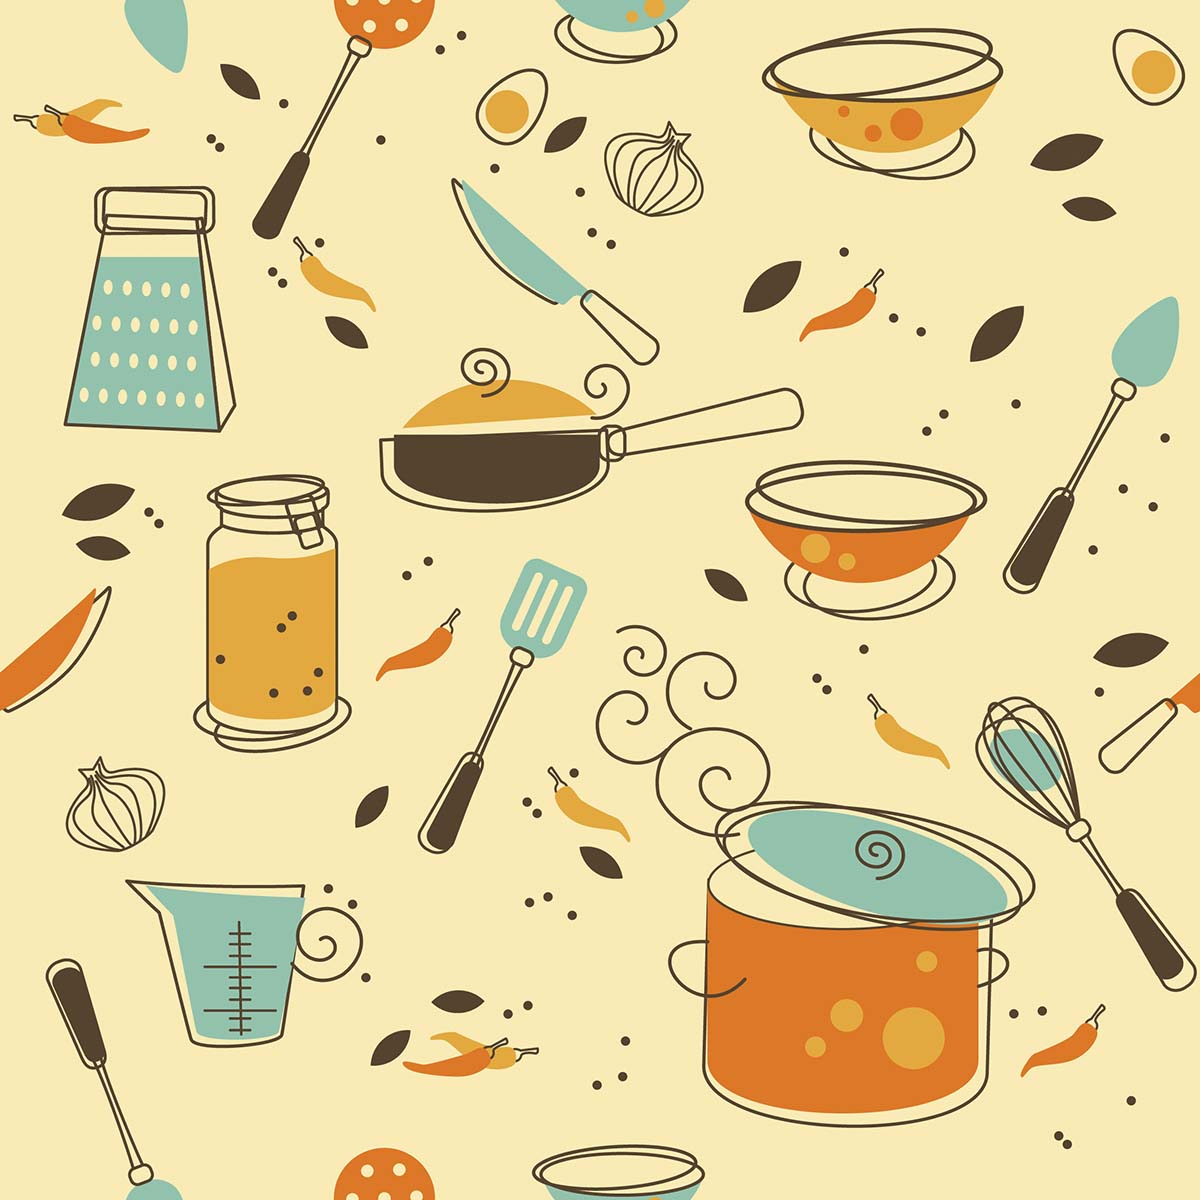 A pattern of kitchen utensils and pots